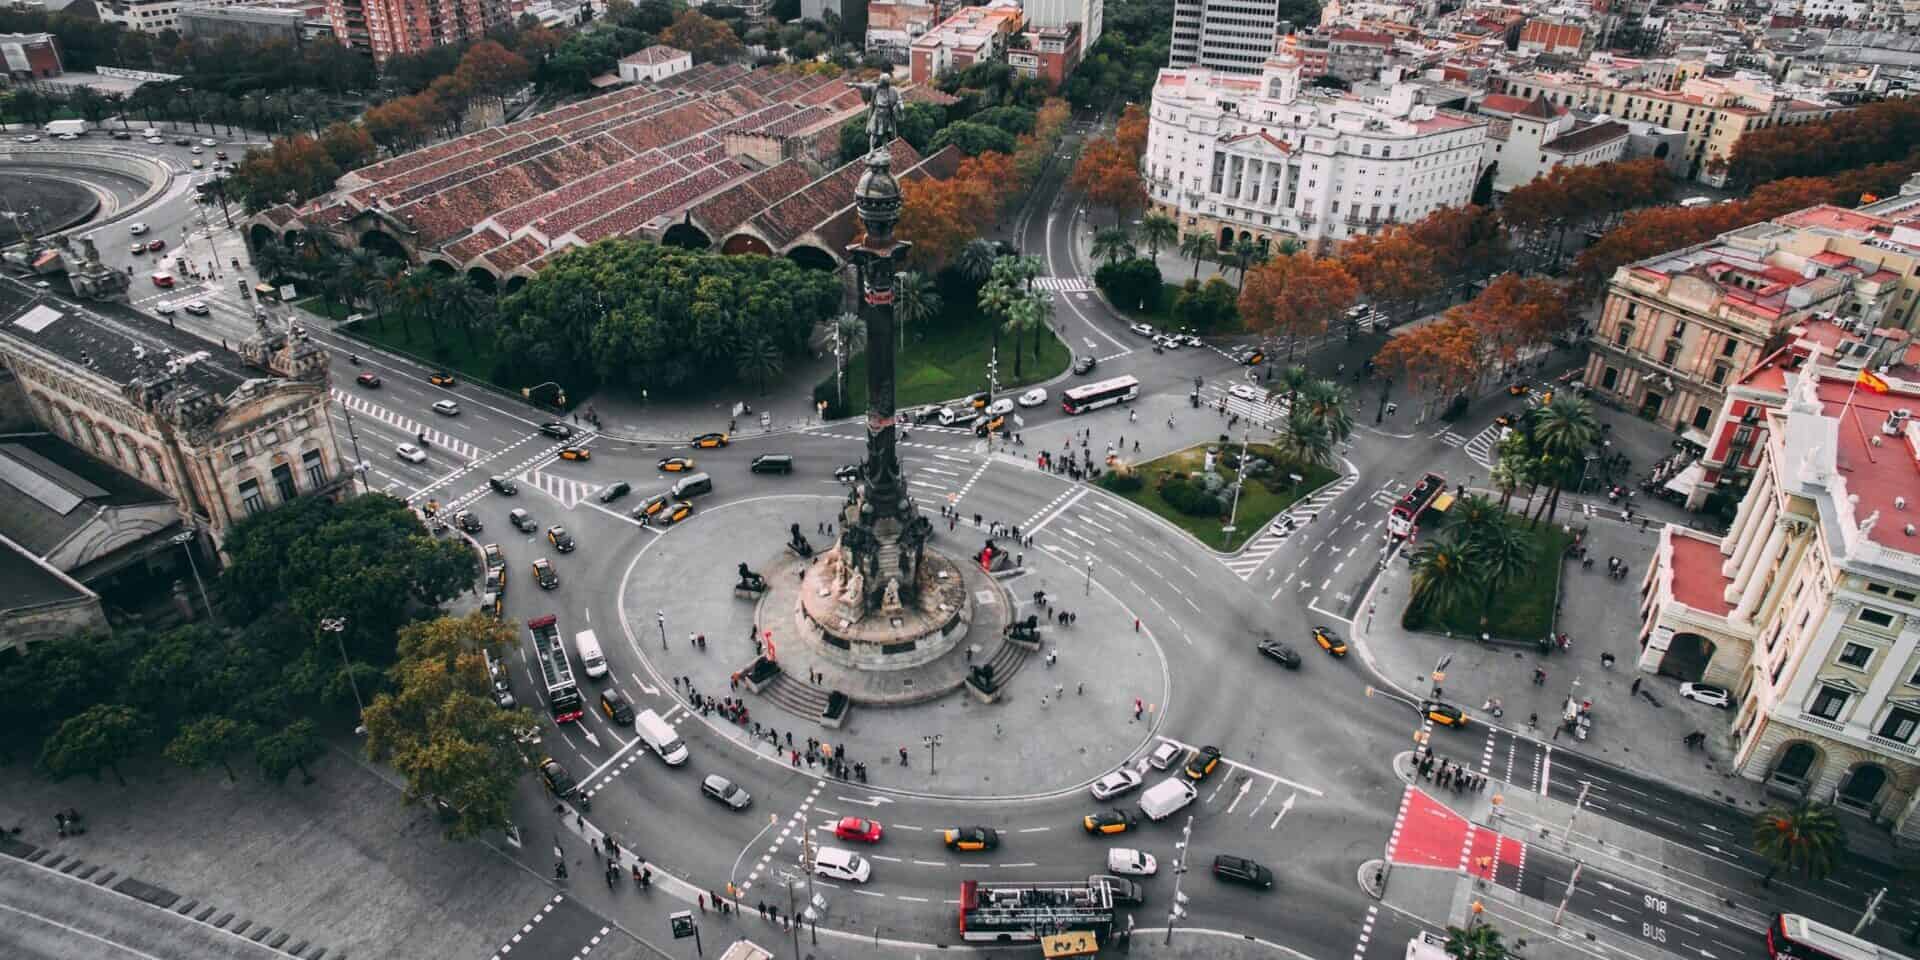 Central traffic circle in Barcelona